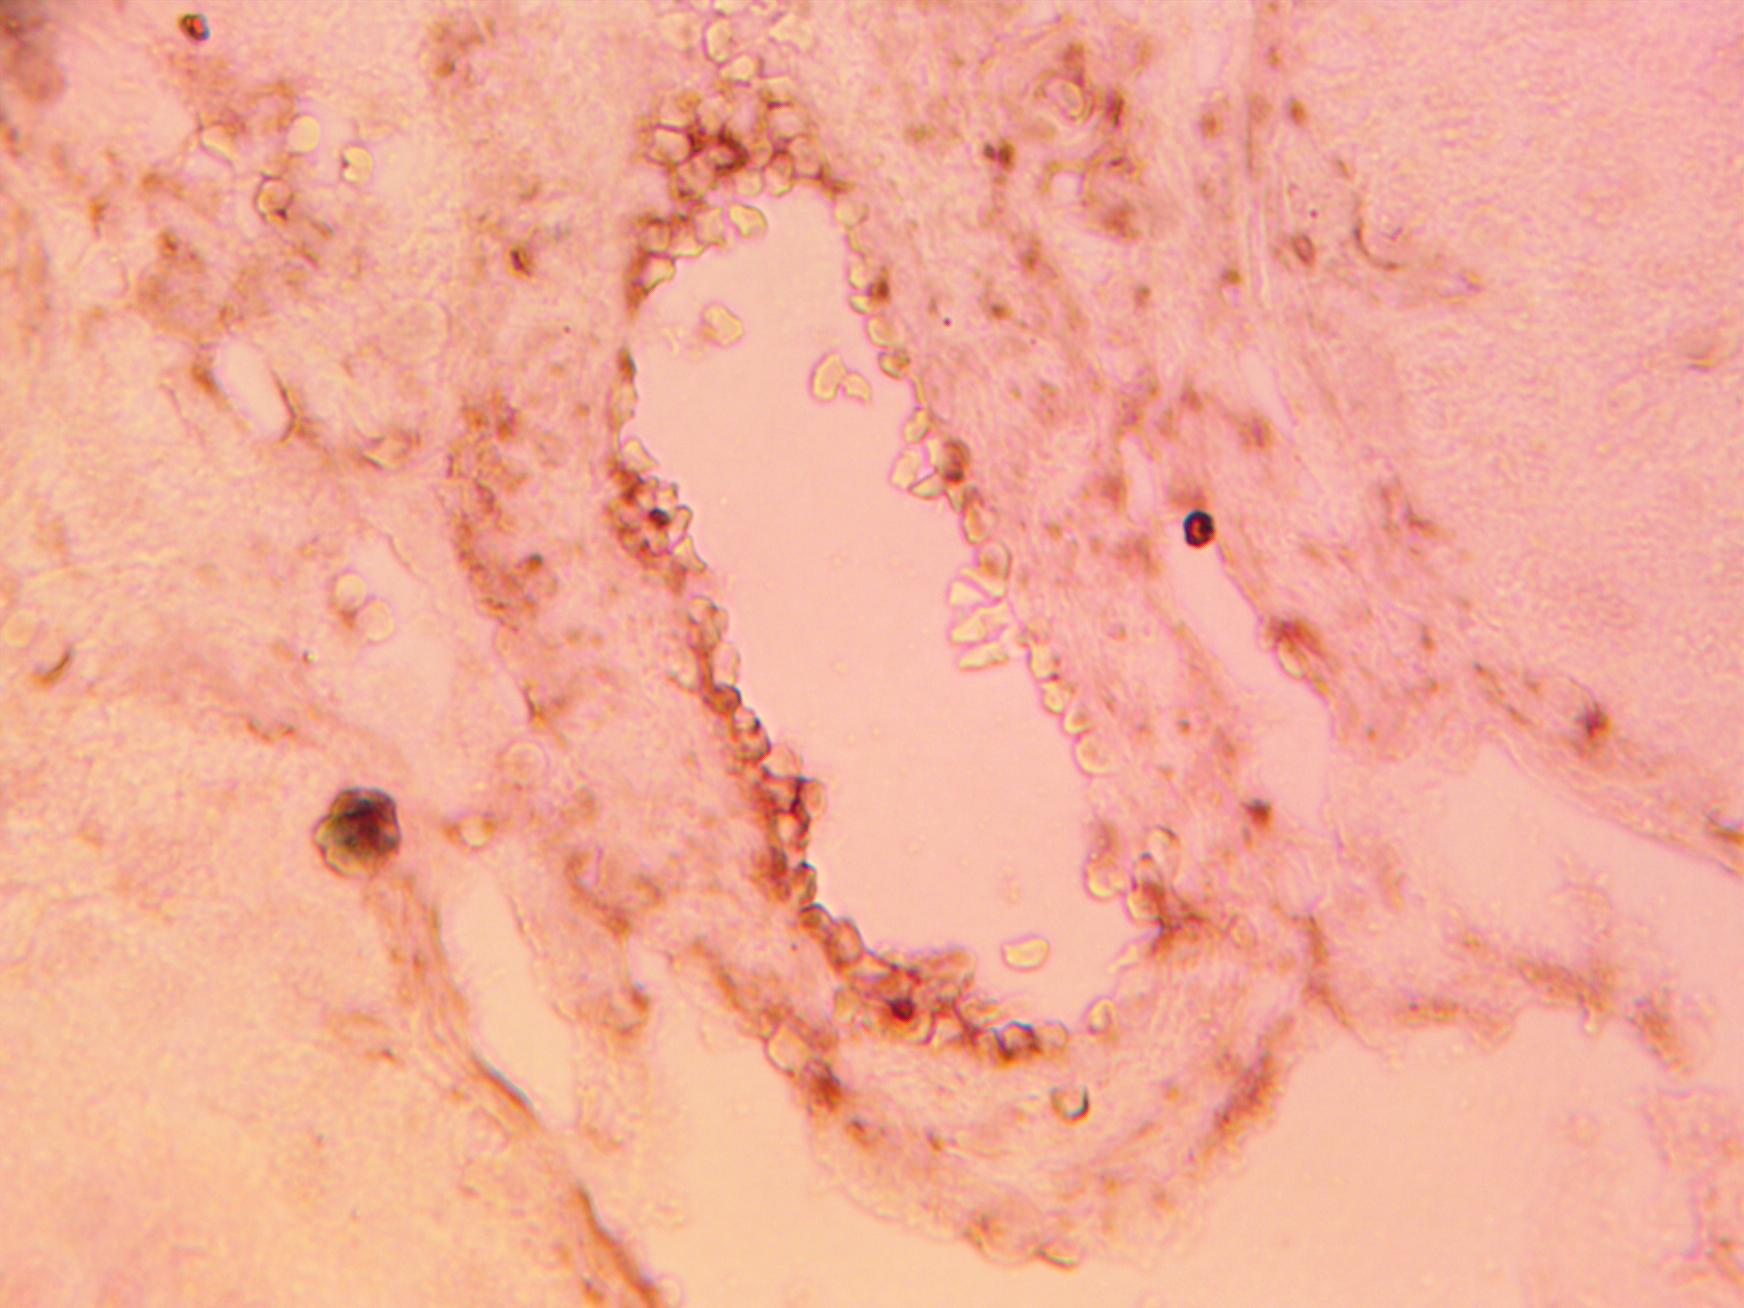 Immunohistochemical staining of normal human testis tissue using BCRP antibody (Cat. No. X2731P) at 10 µg/ml and detected using anti-Rabbit HRP secondary antibody and visualized using DAB substrate and hematoxylin counterstain.